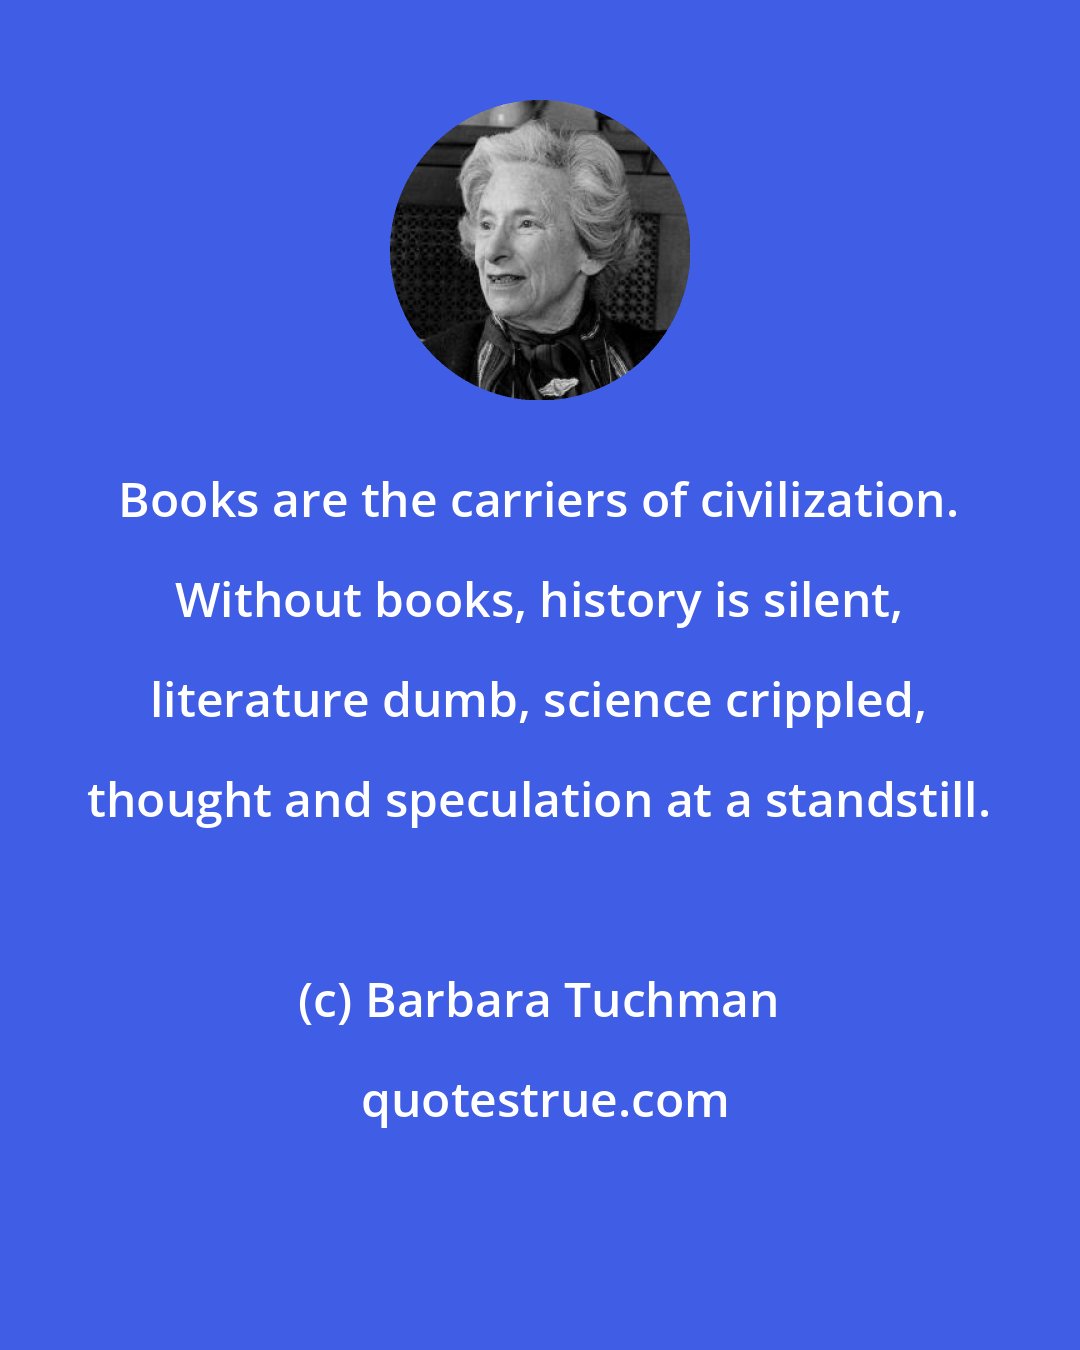 Barbara Tuchman: Books are the carriers of civilization. Without books, history is silent, literature dumb, science crippled, thought and speculation at a standstill.